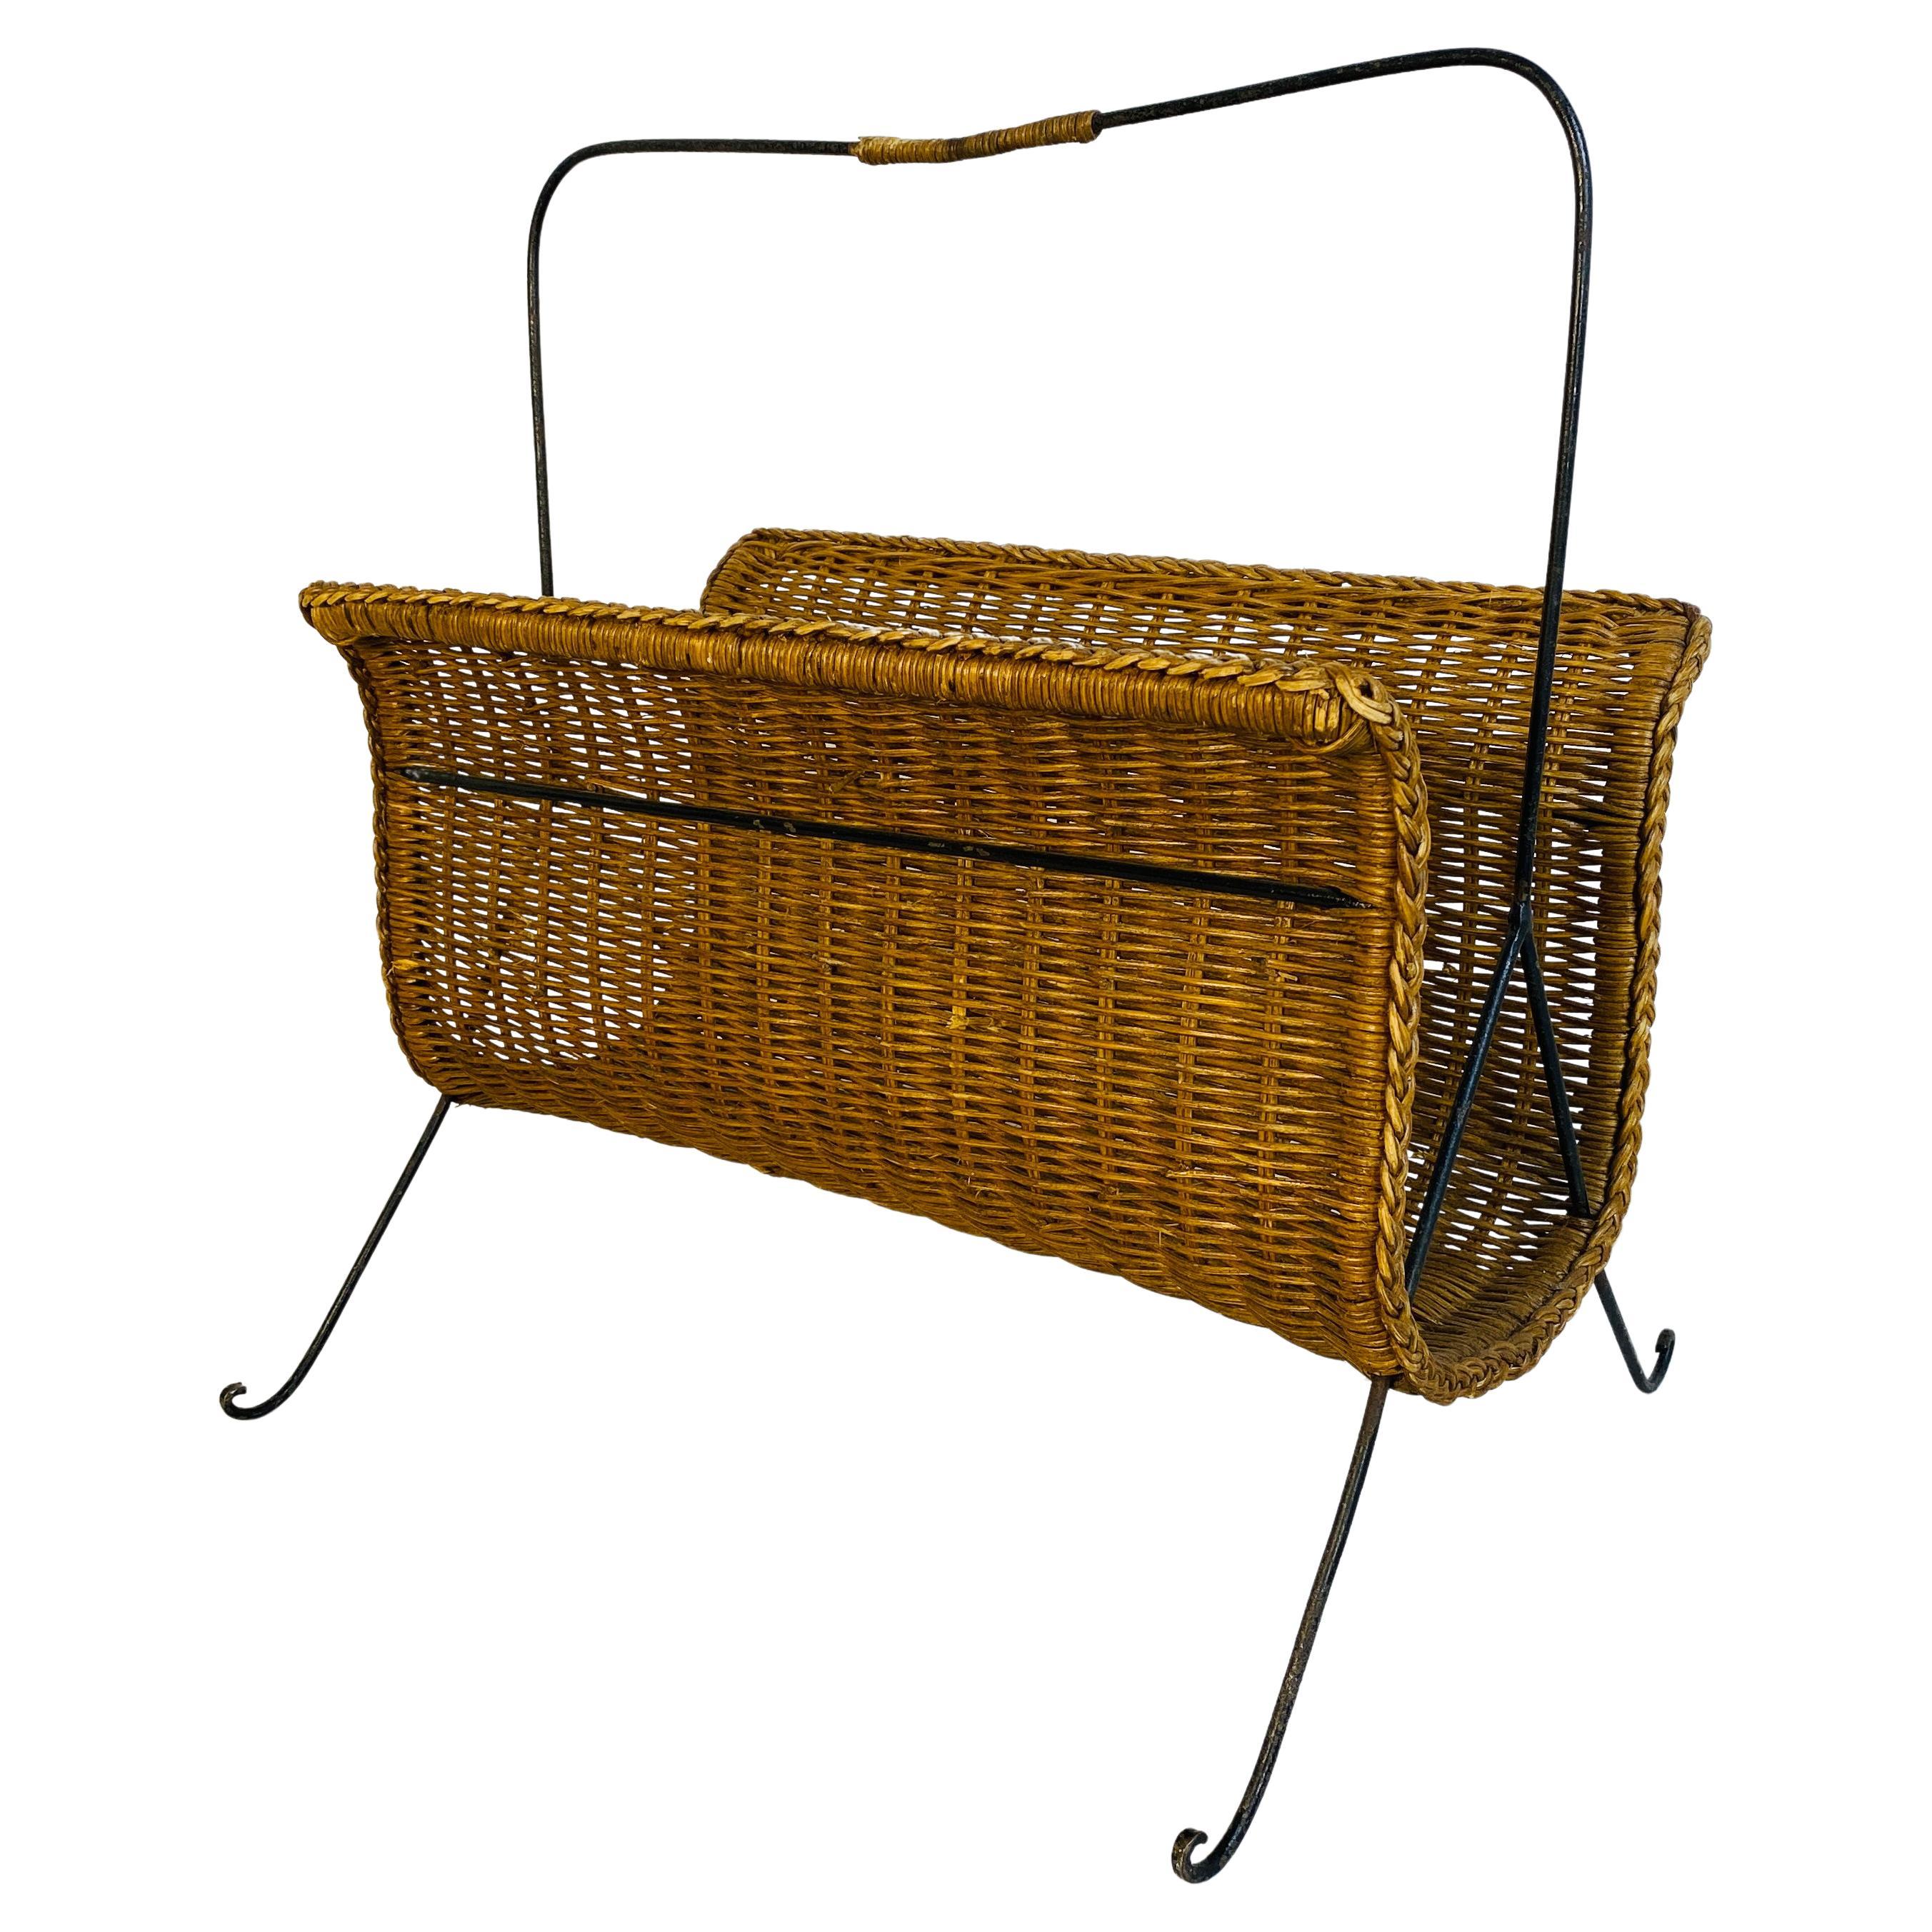 Italian Mid-Century Modern Straw Magazine Rack with Metal Structure, 1970s For Sale